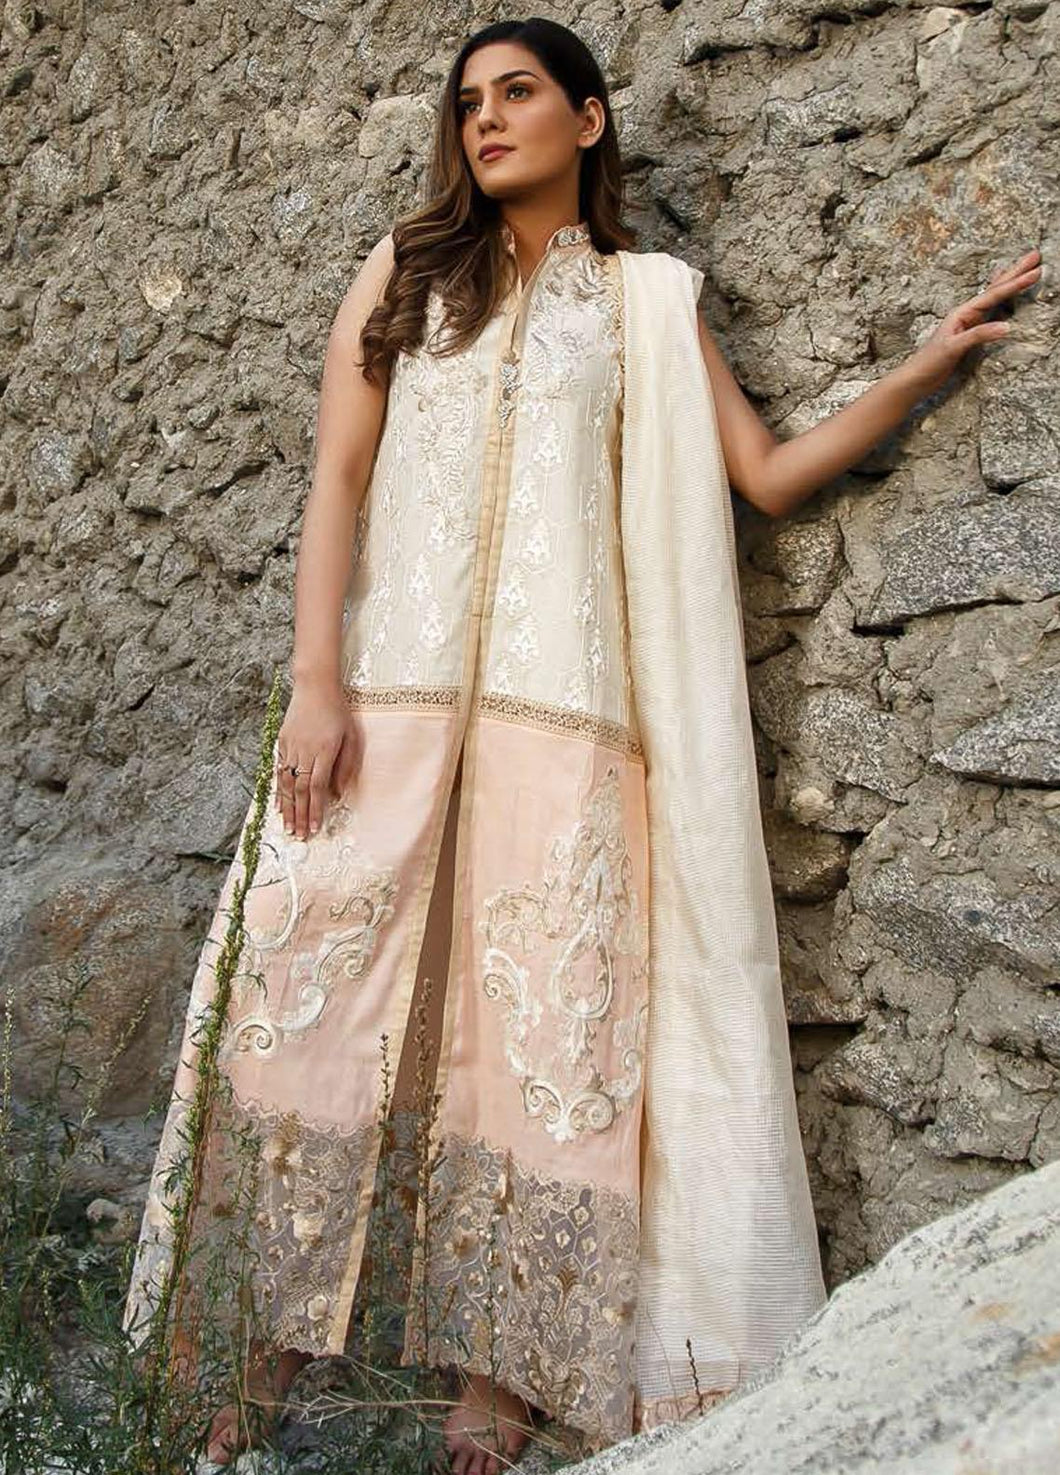 ZUNUJ | SOIREE FORMAL COLLECTION 2021 | LARKSPUR | D-05 Peach Dress exclusively available @lebaasonline. ZUNUJ PAKISTANI SUITS ONLINE is available for evening/party wear. We have various other brands such as MARIA B, SANA SAFINAZ. PAKISTANI BRIDAL DRESSES ONLINE UK can be customized in USA, France, UK at LEBAASONLINE